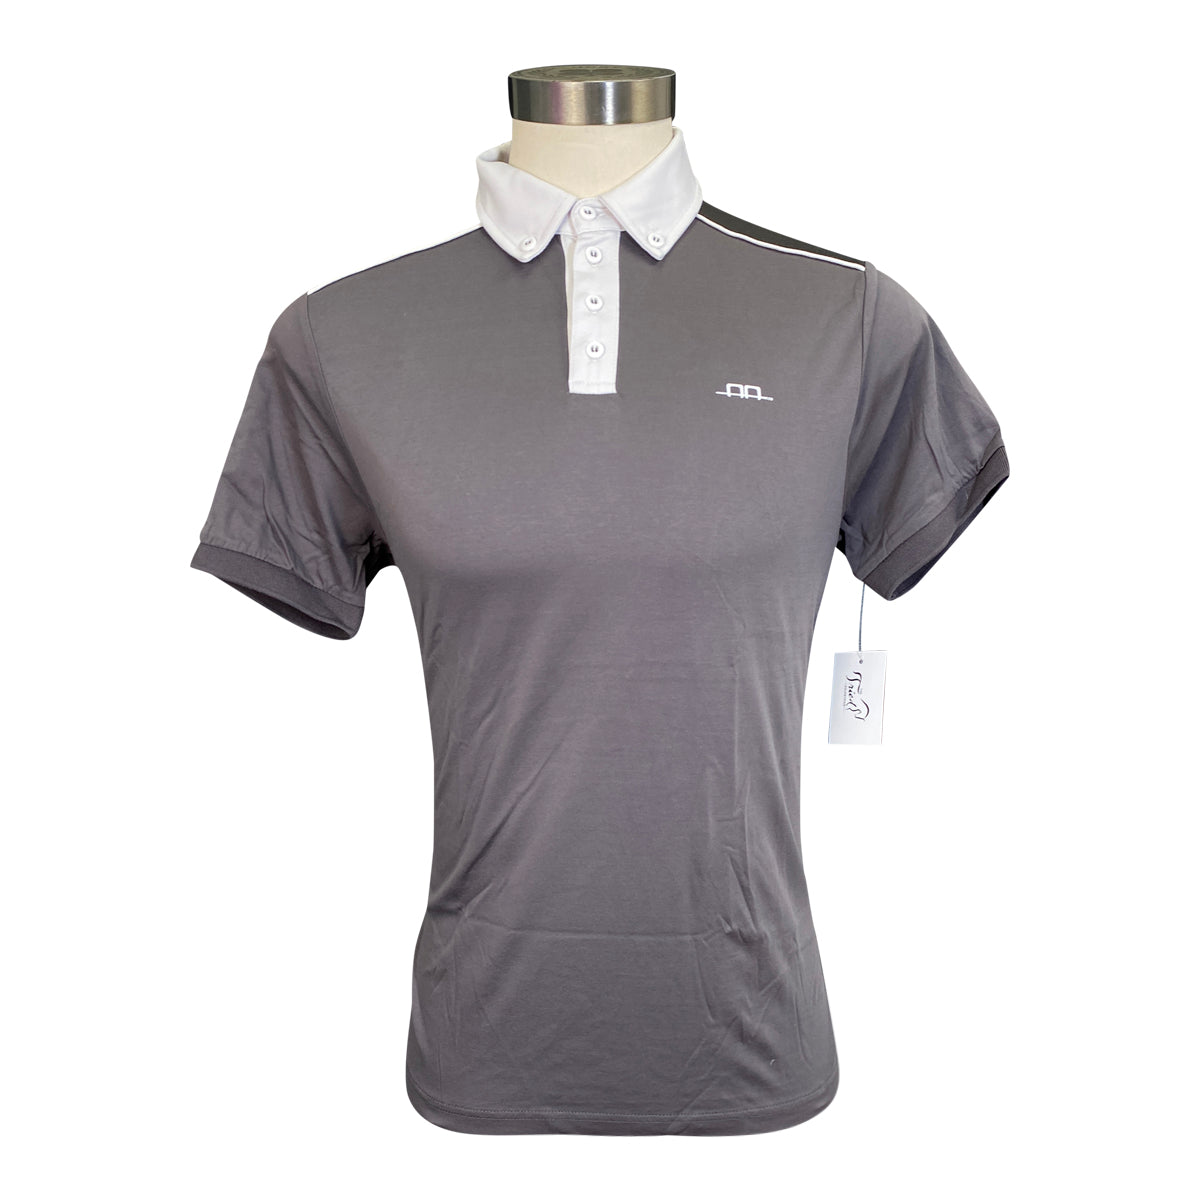 AA Platinum 'Davide' Men's Polo Shirt in Grey w/White Piping